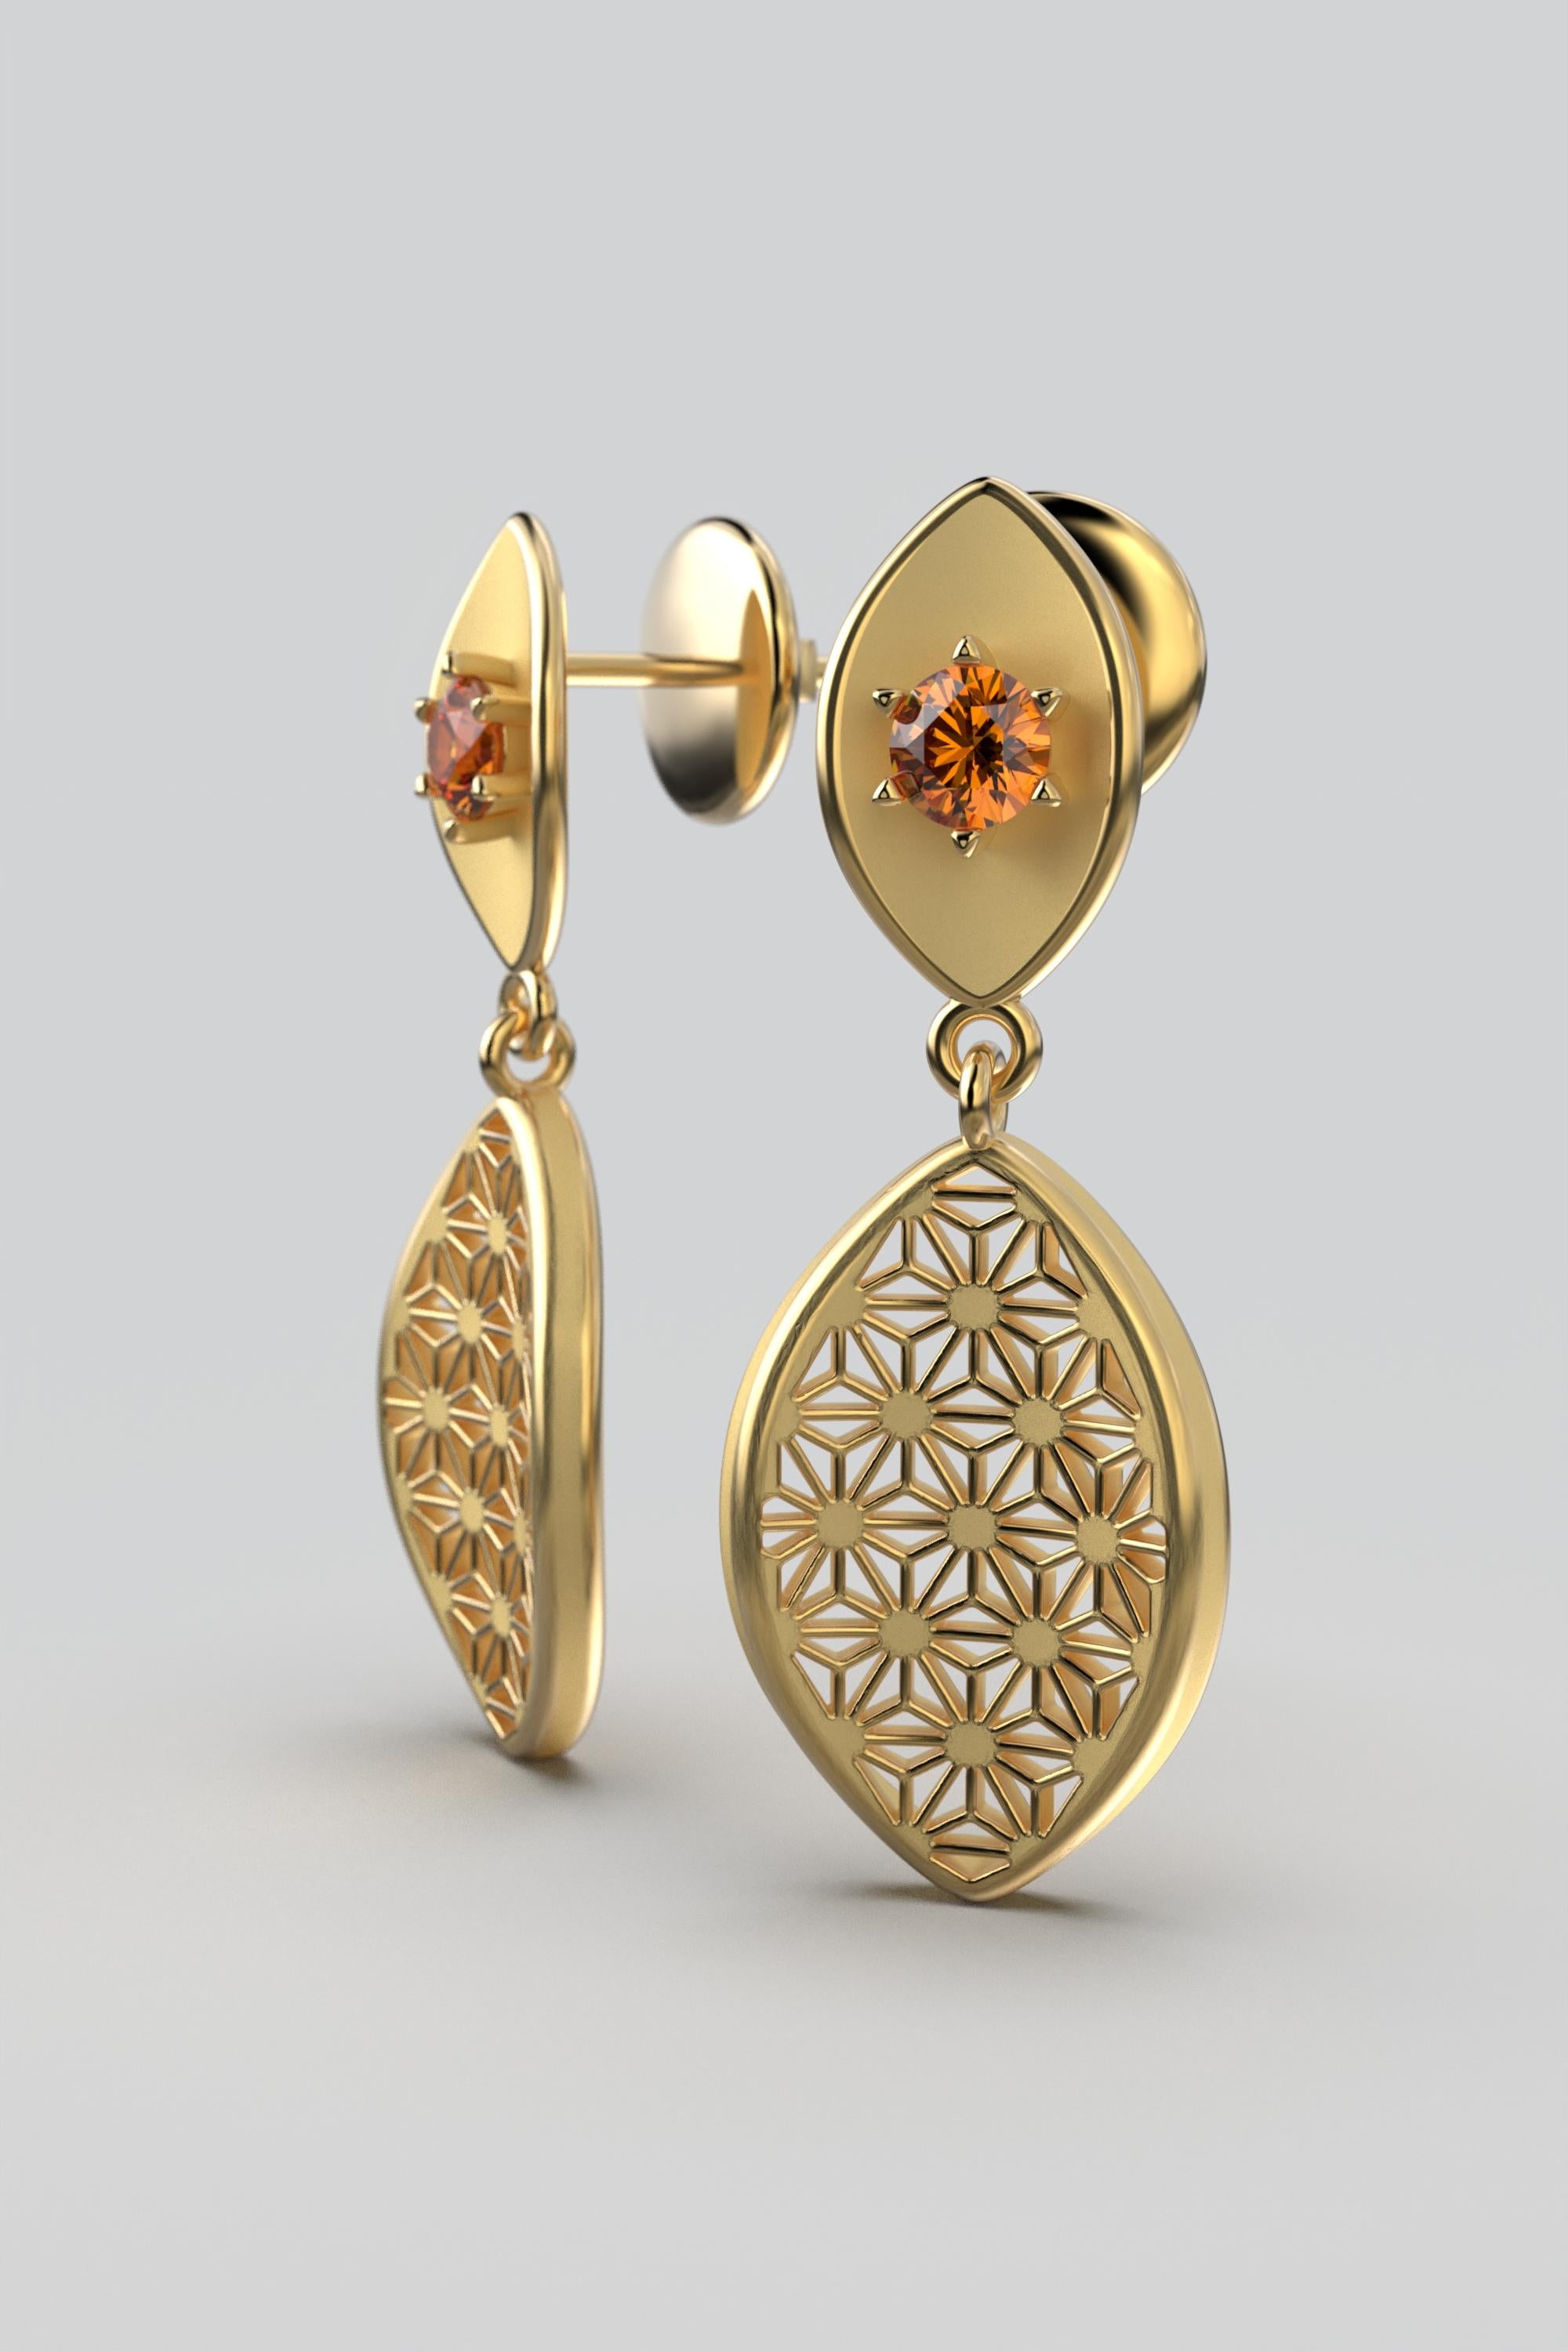 Made to order Italian 18k Gold Earrings.
Discover exquisite Italian Gold Earrings made in Italy. Our collection features stunning Hessonite Mandarin Garnet Earrings, adorned with Sashiko Japanese Pattern for a unique touch. Explore our curated